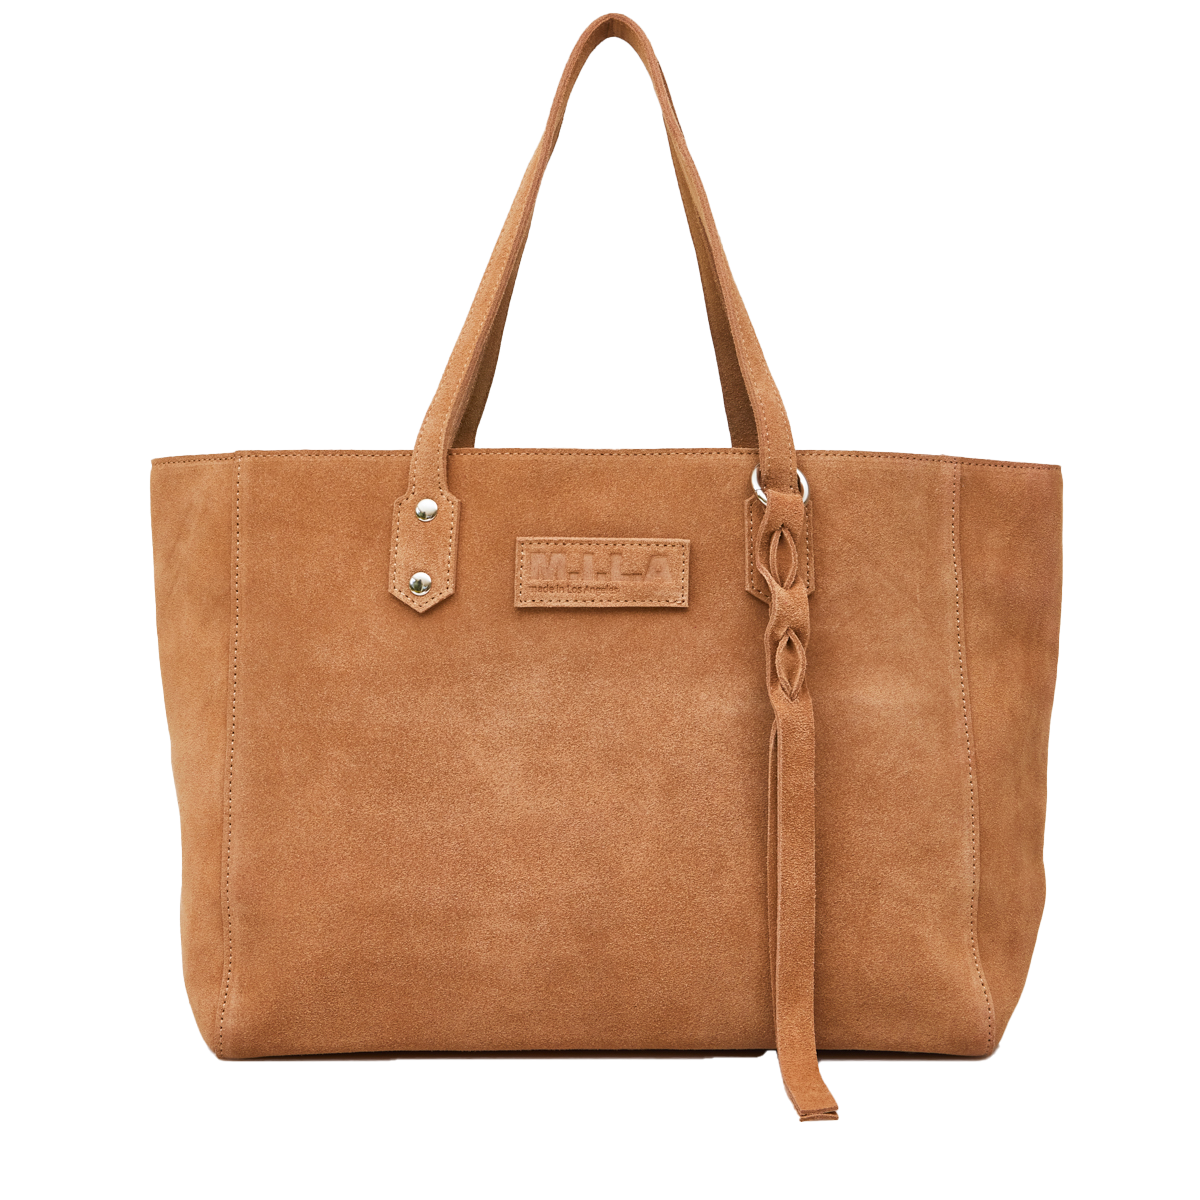 MILA / M.I.L.A. / Made In Los Angeles Luxe Tote Bag Suede in Camel